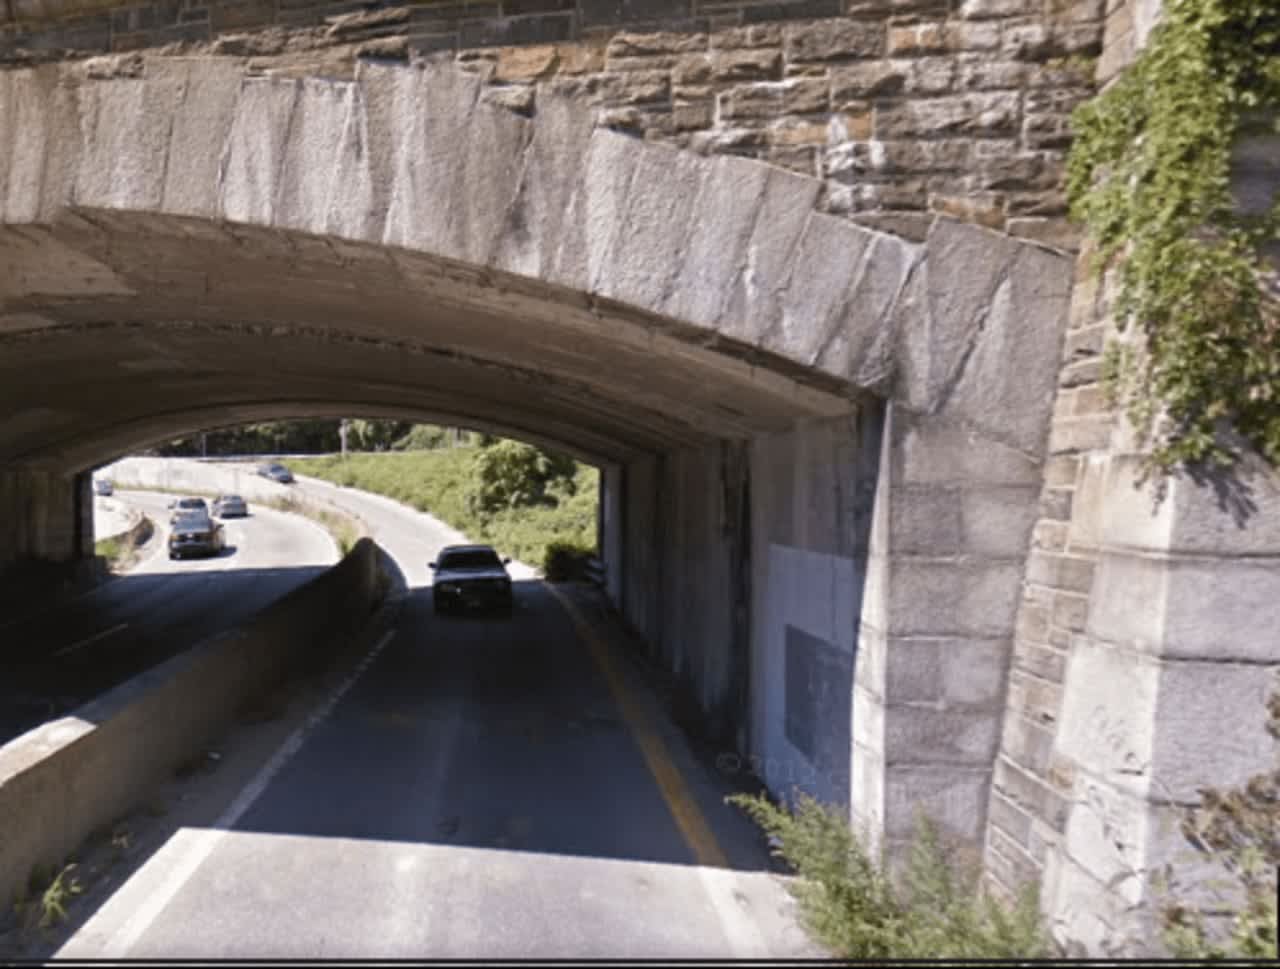 A minibus on the Saw Mill River Parkway struck the Yonkers Avenue overpass.